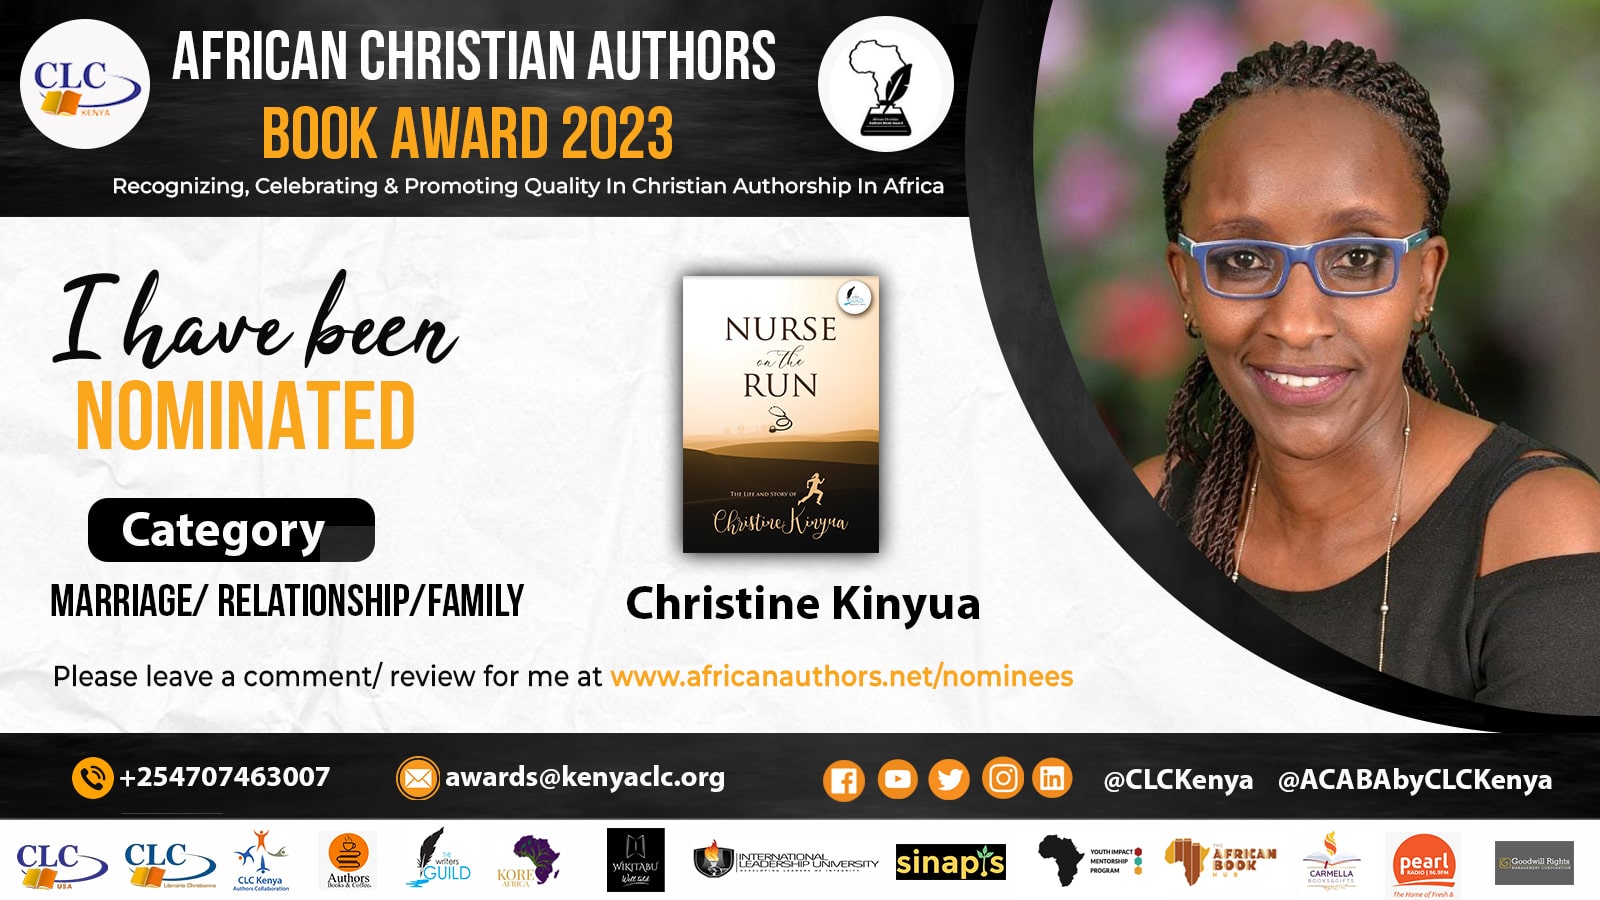 Christine Kinyua Had Been ‘A Nurse On The Run’, Read About Her Surrender To God In Her Authorship Journey